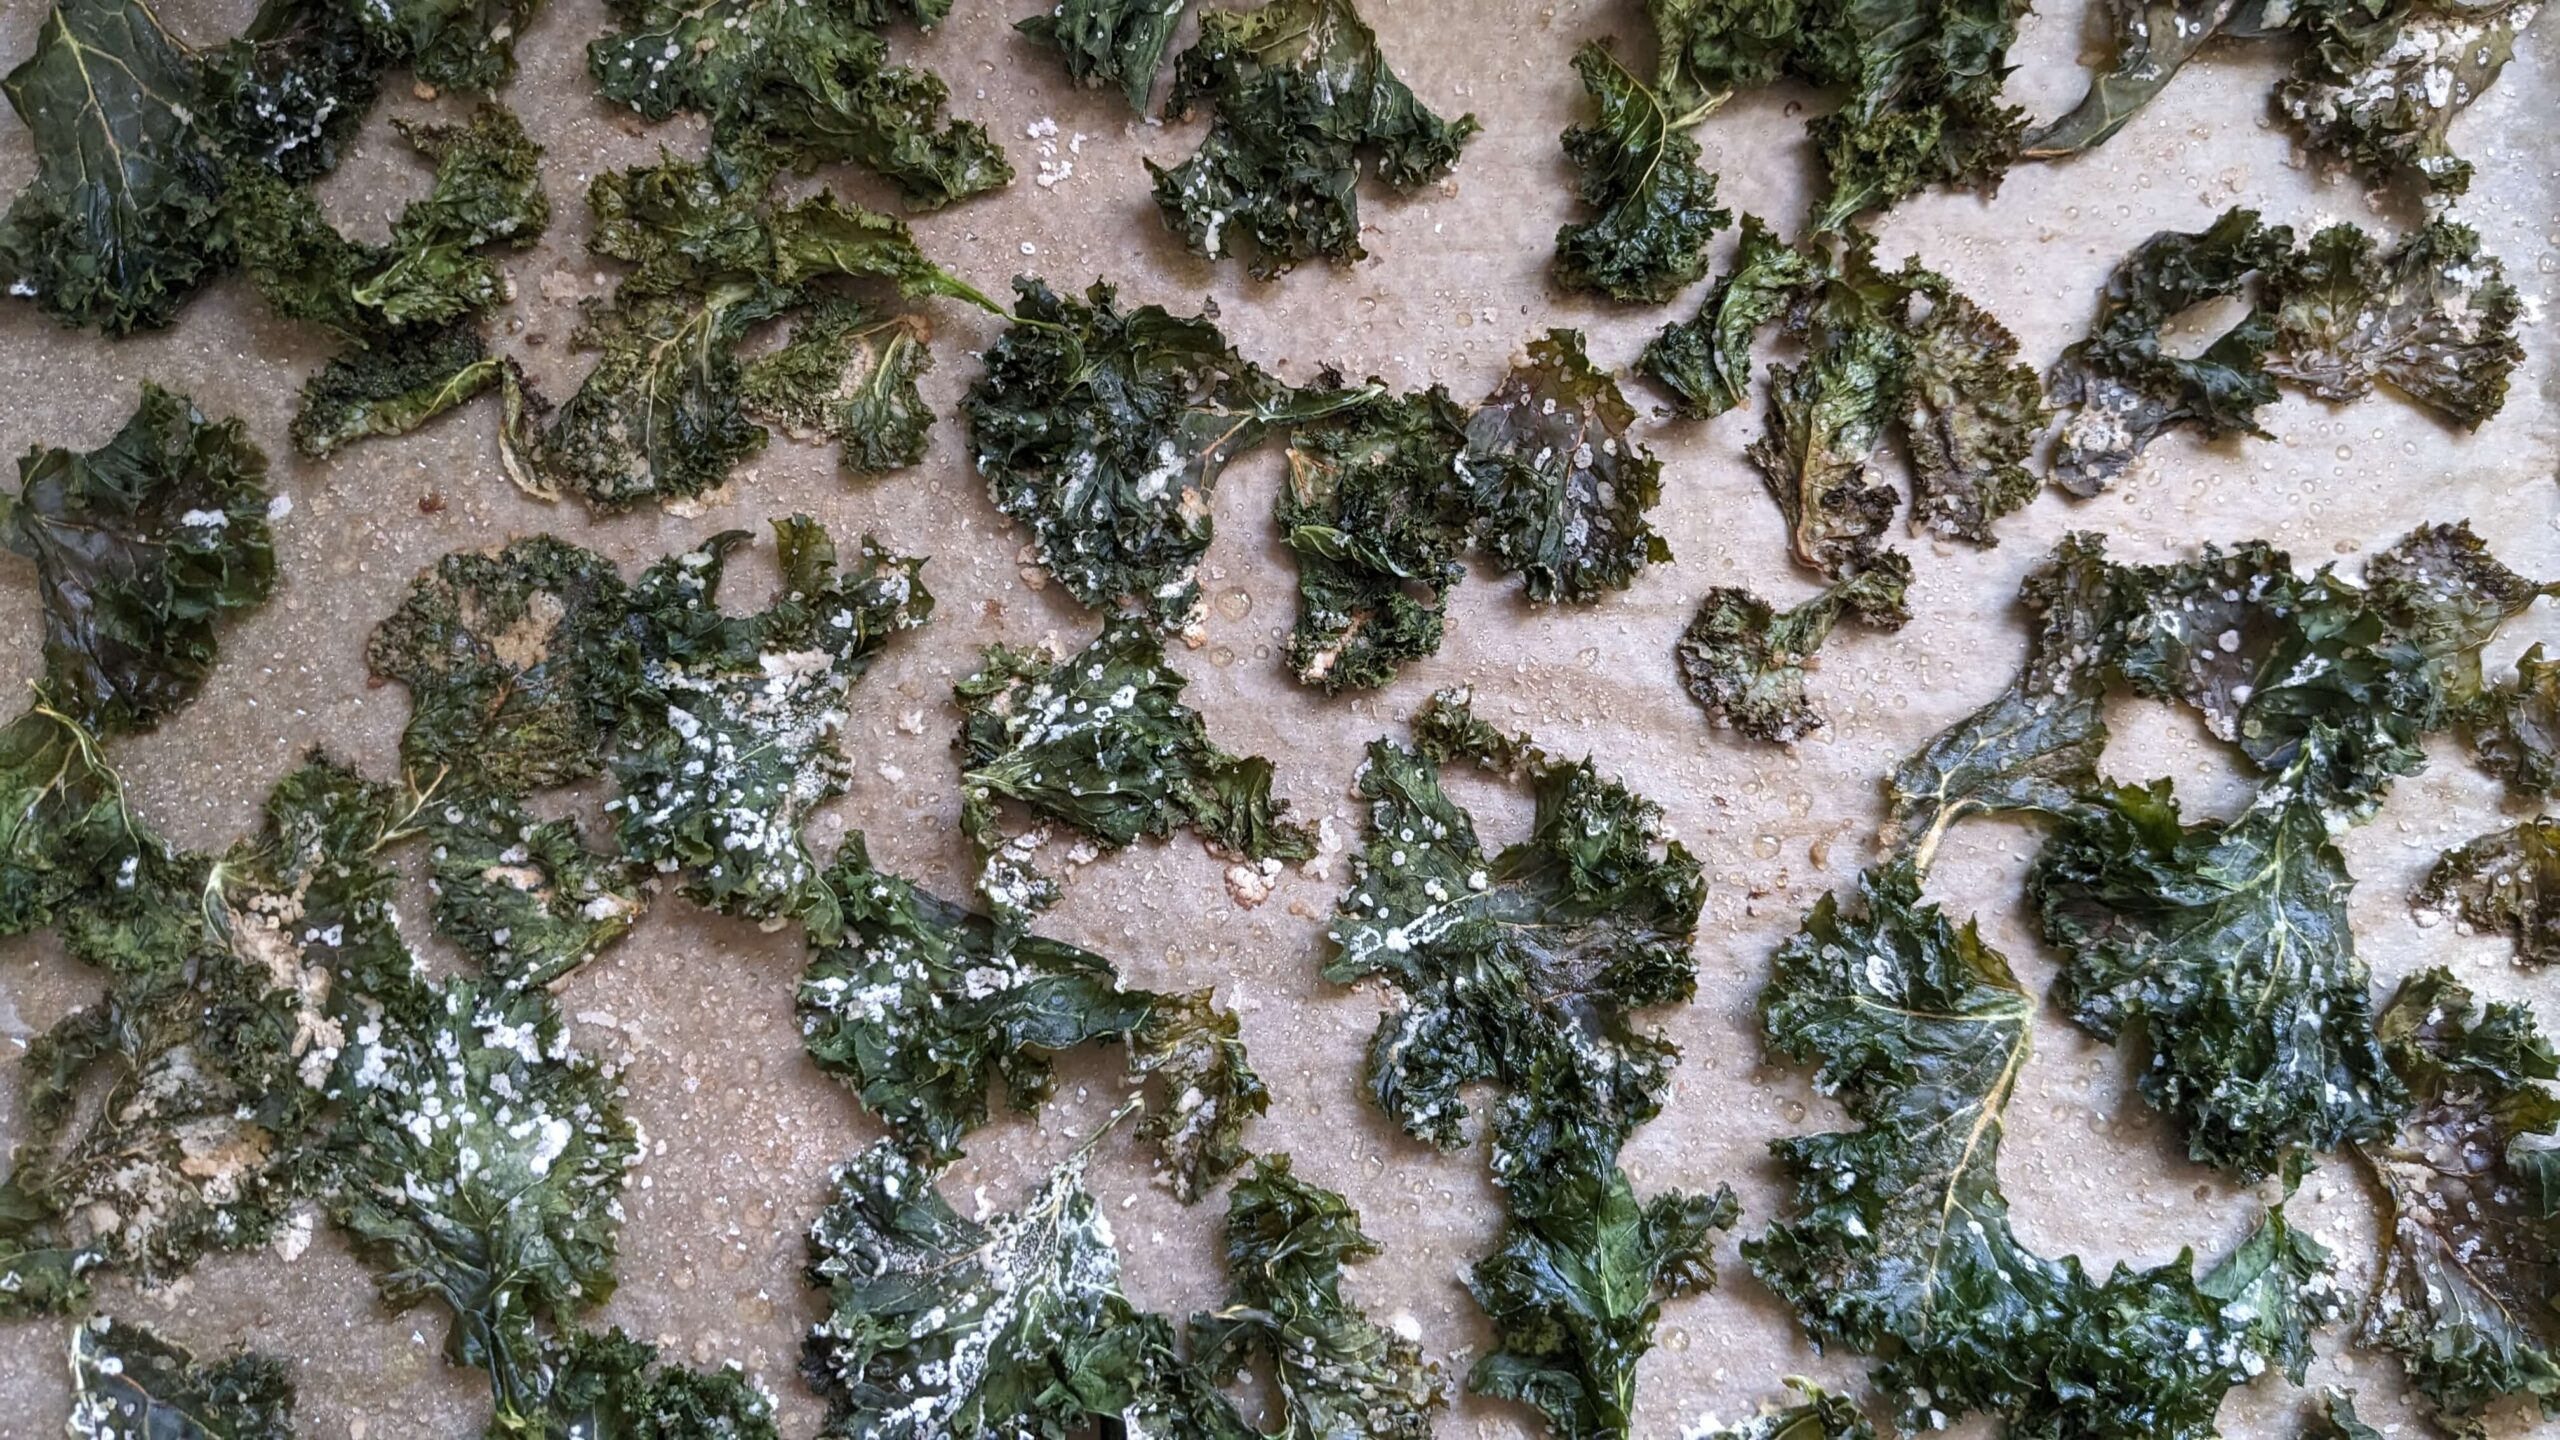 Kale Chips Without an Air Fryer